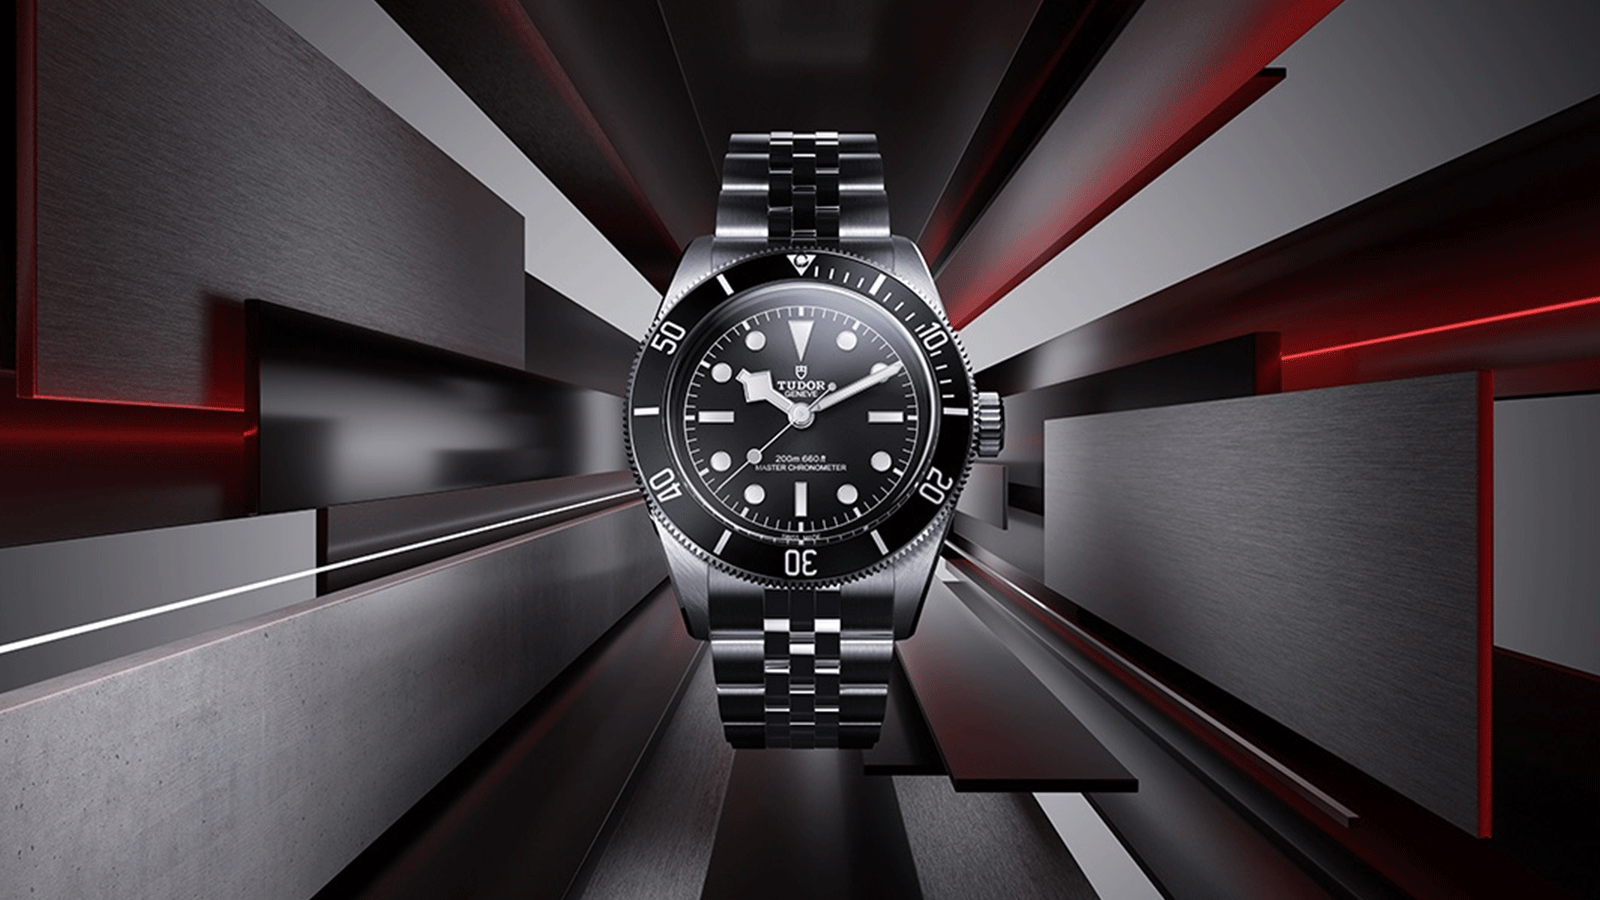 TUDOR introduces the newest iteration of the Black Bay, featuring an inky black dial, black aluminum insert and applied rhodium-plated hour markers and hands for a modern, monochromatic aesthetic.